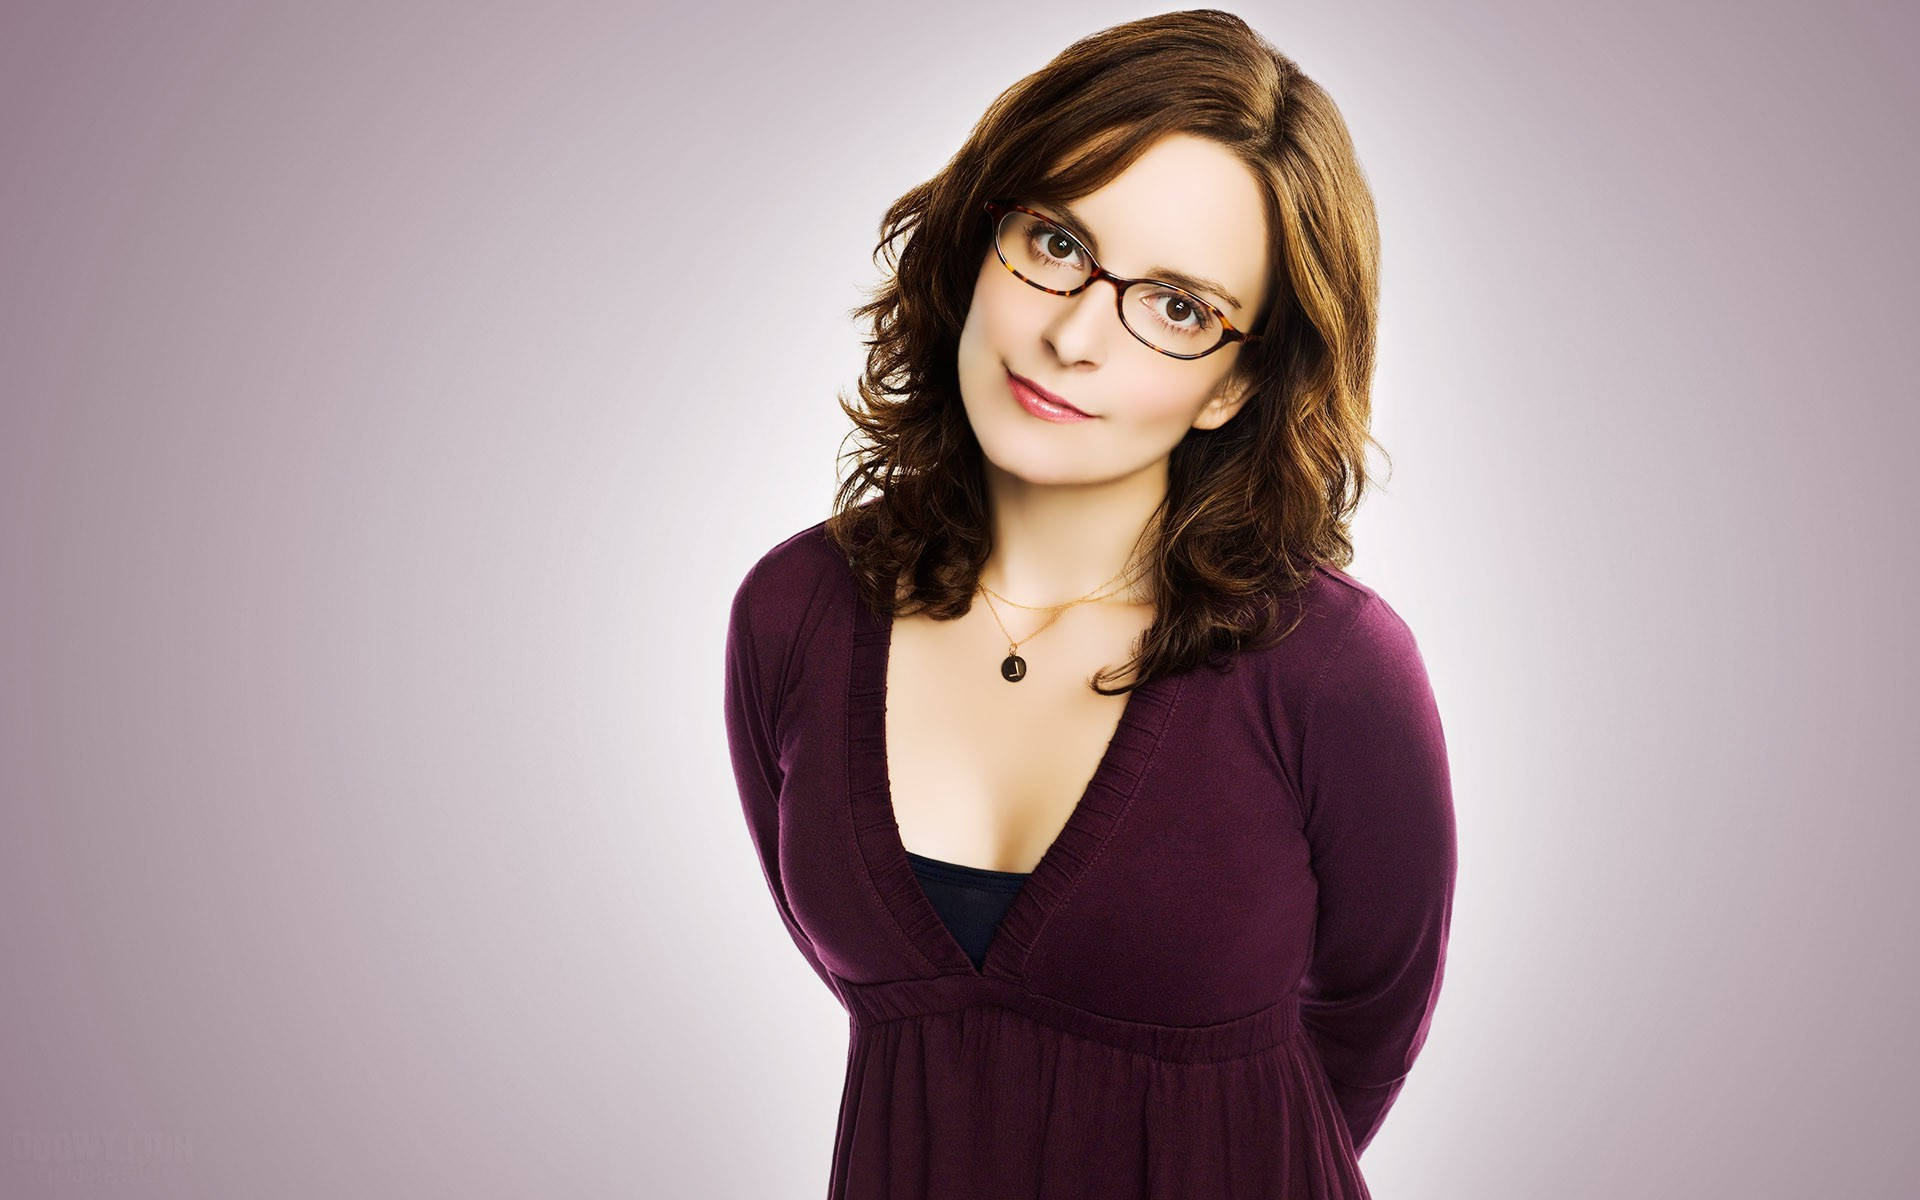 Tina Fey, The Emblem Of American Comedy